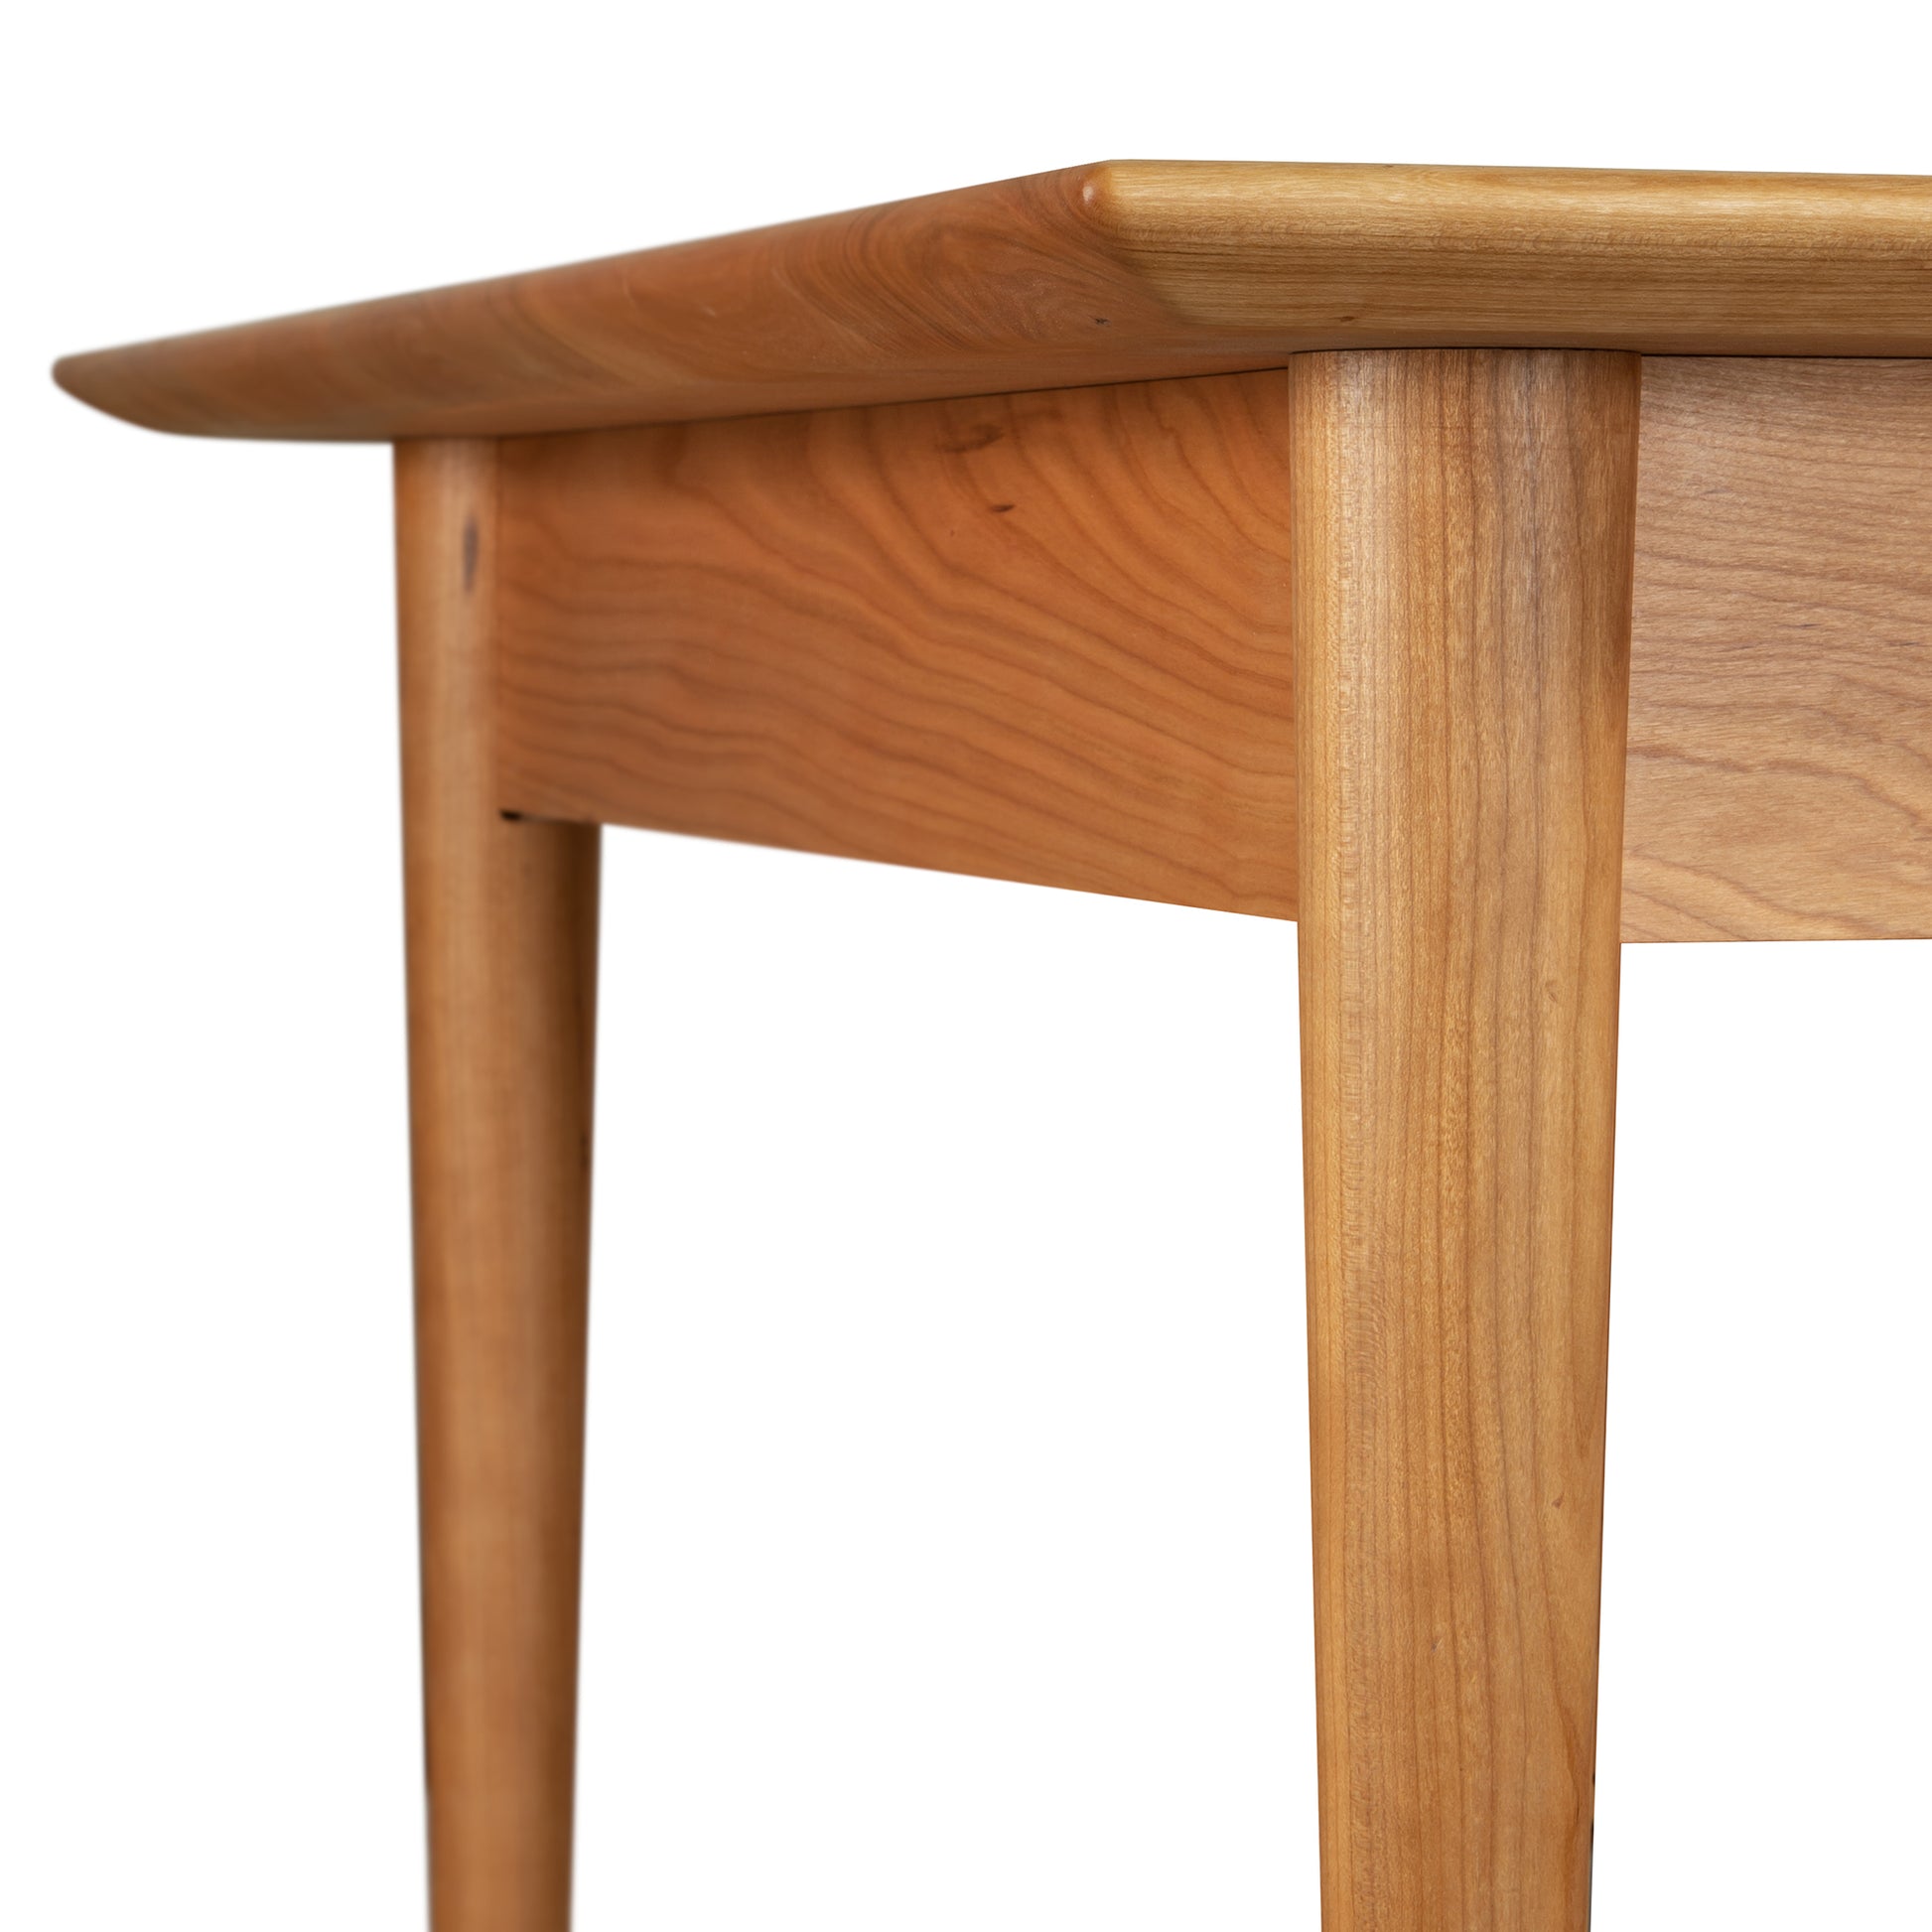 A close up of a Burke Modern Dining Table by Vermont Woods Studios, showcasing exquisite craftsmanship.